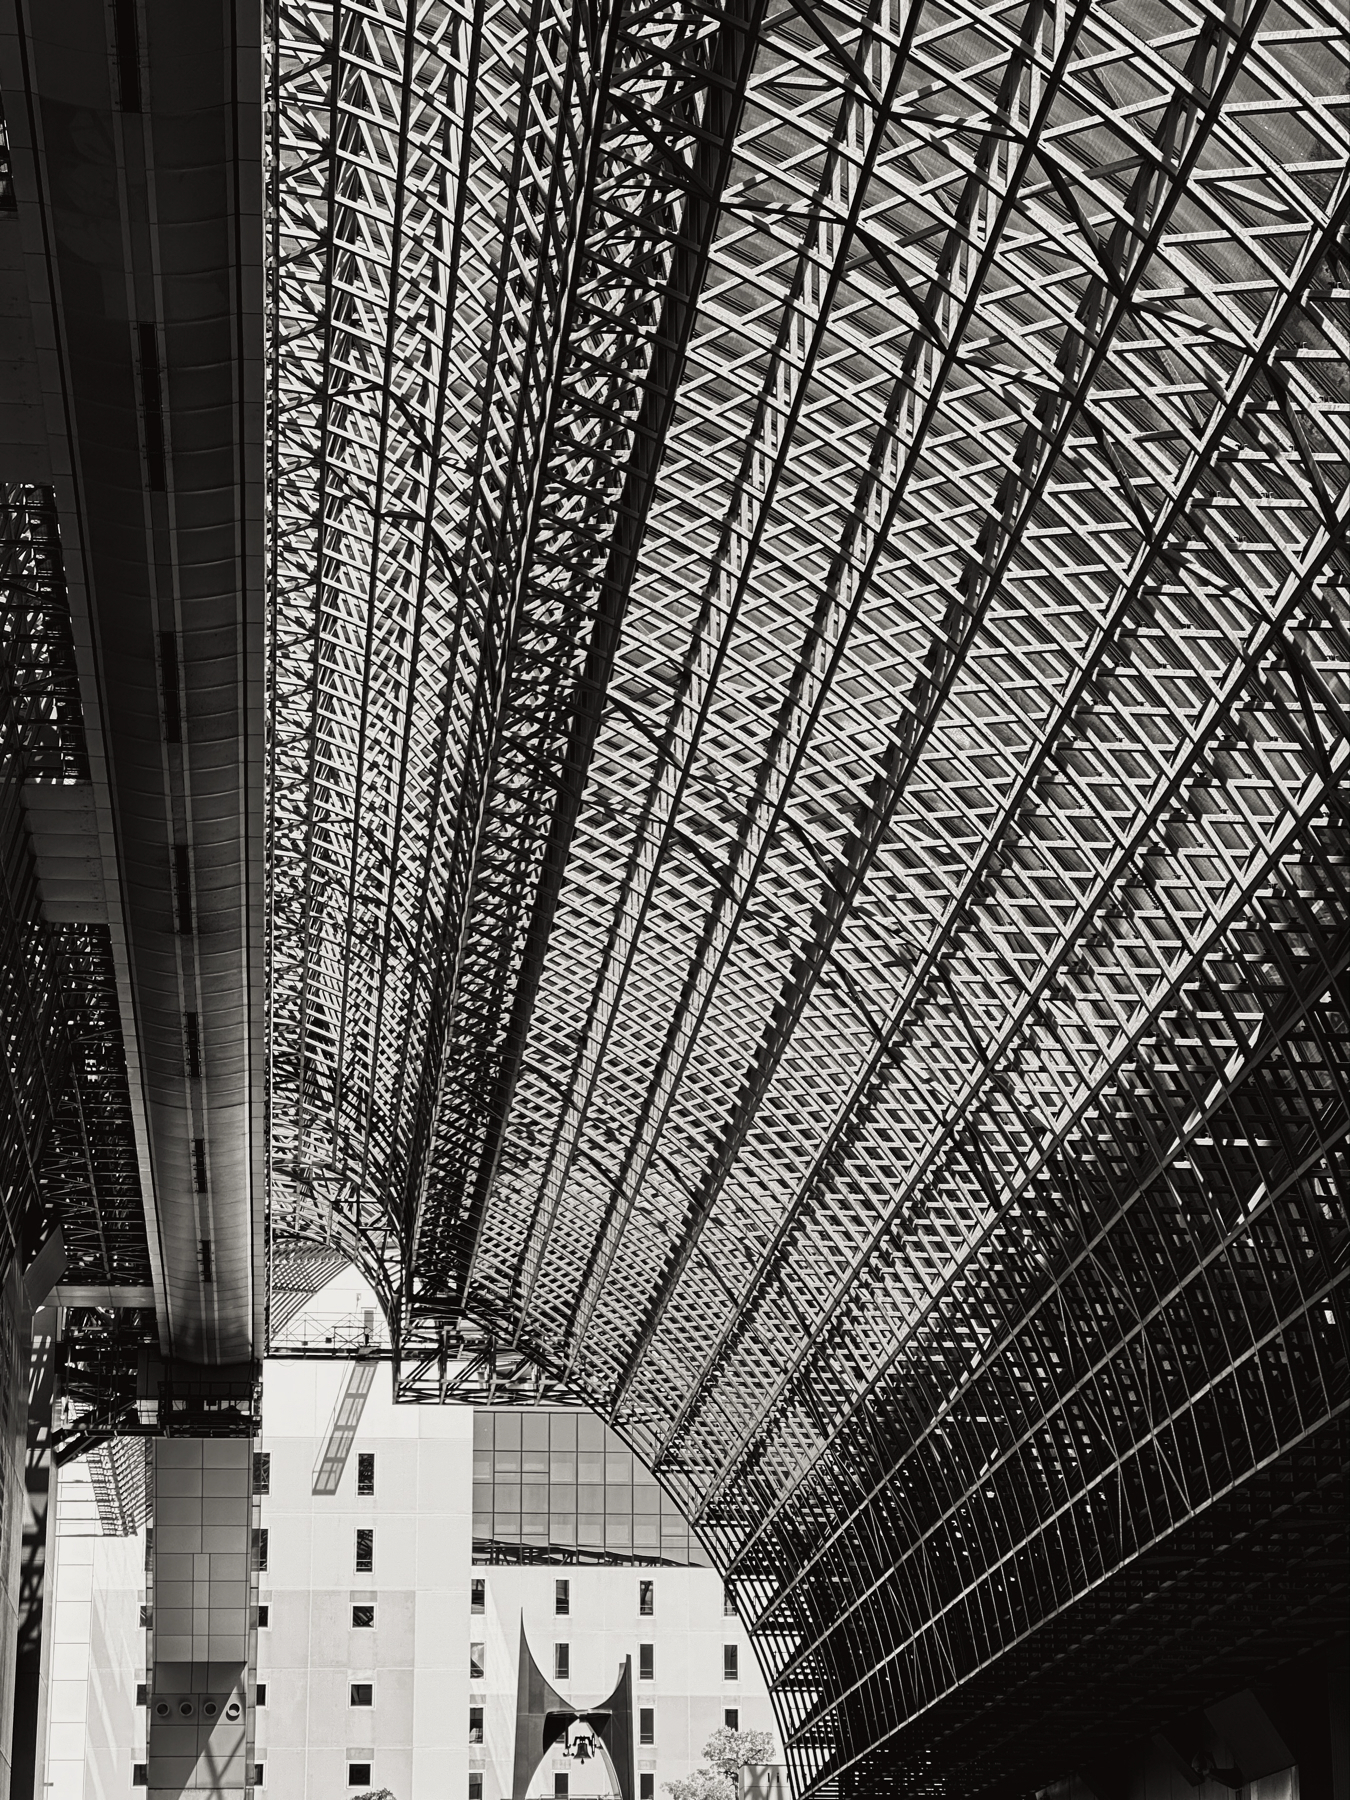 A black and white photo showing the metal and glass lattice that makes up the ceiling